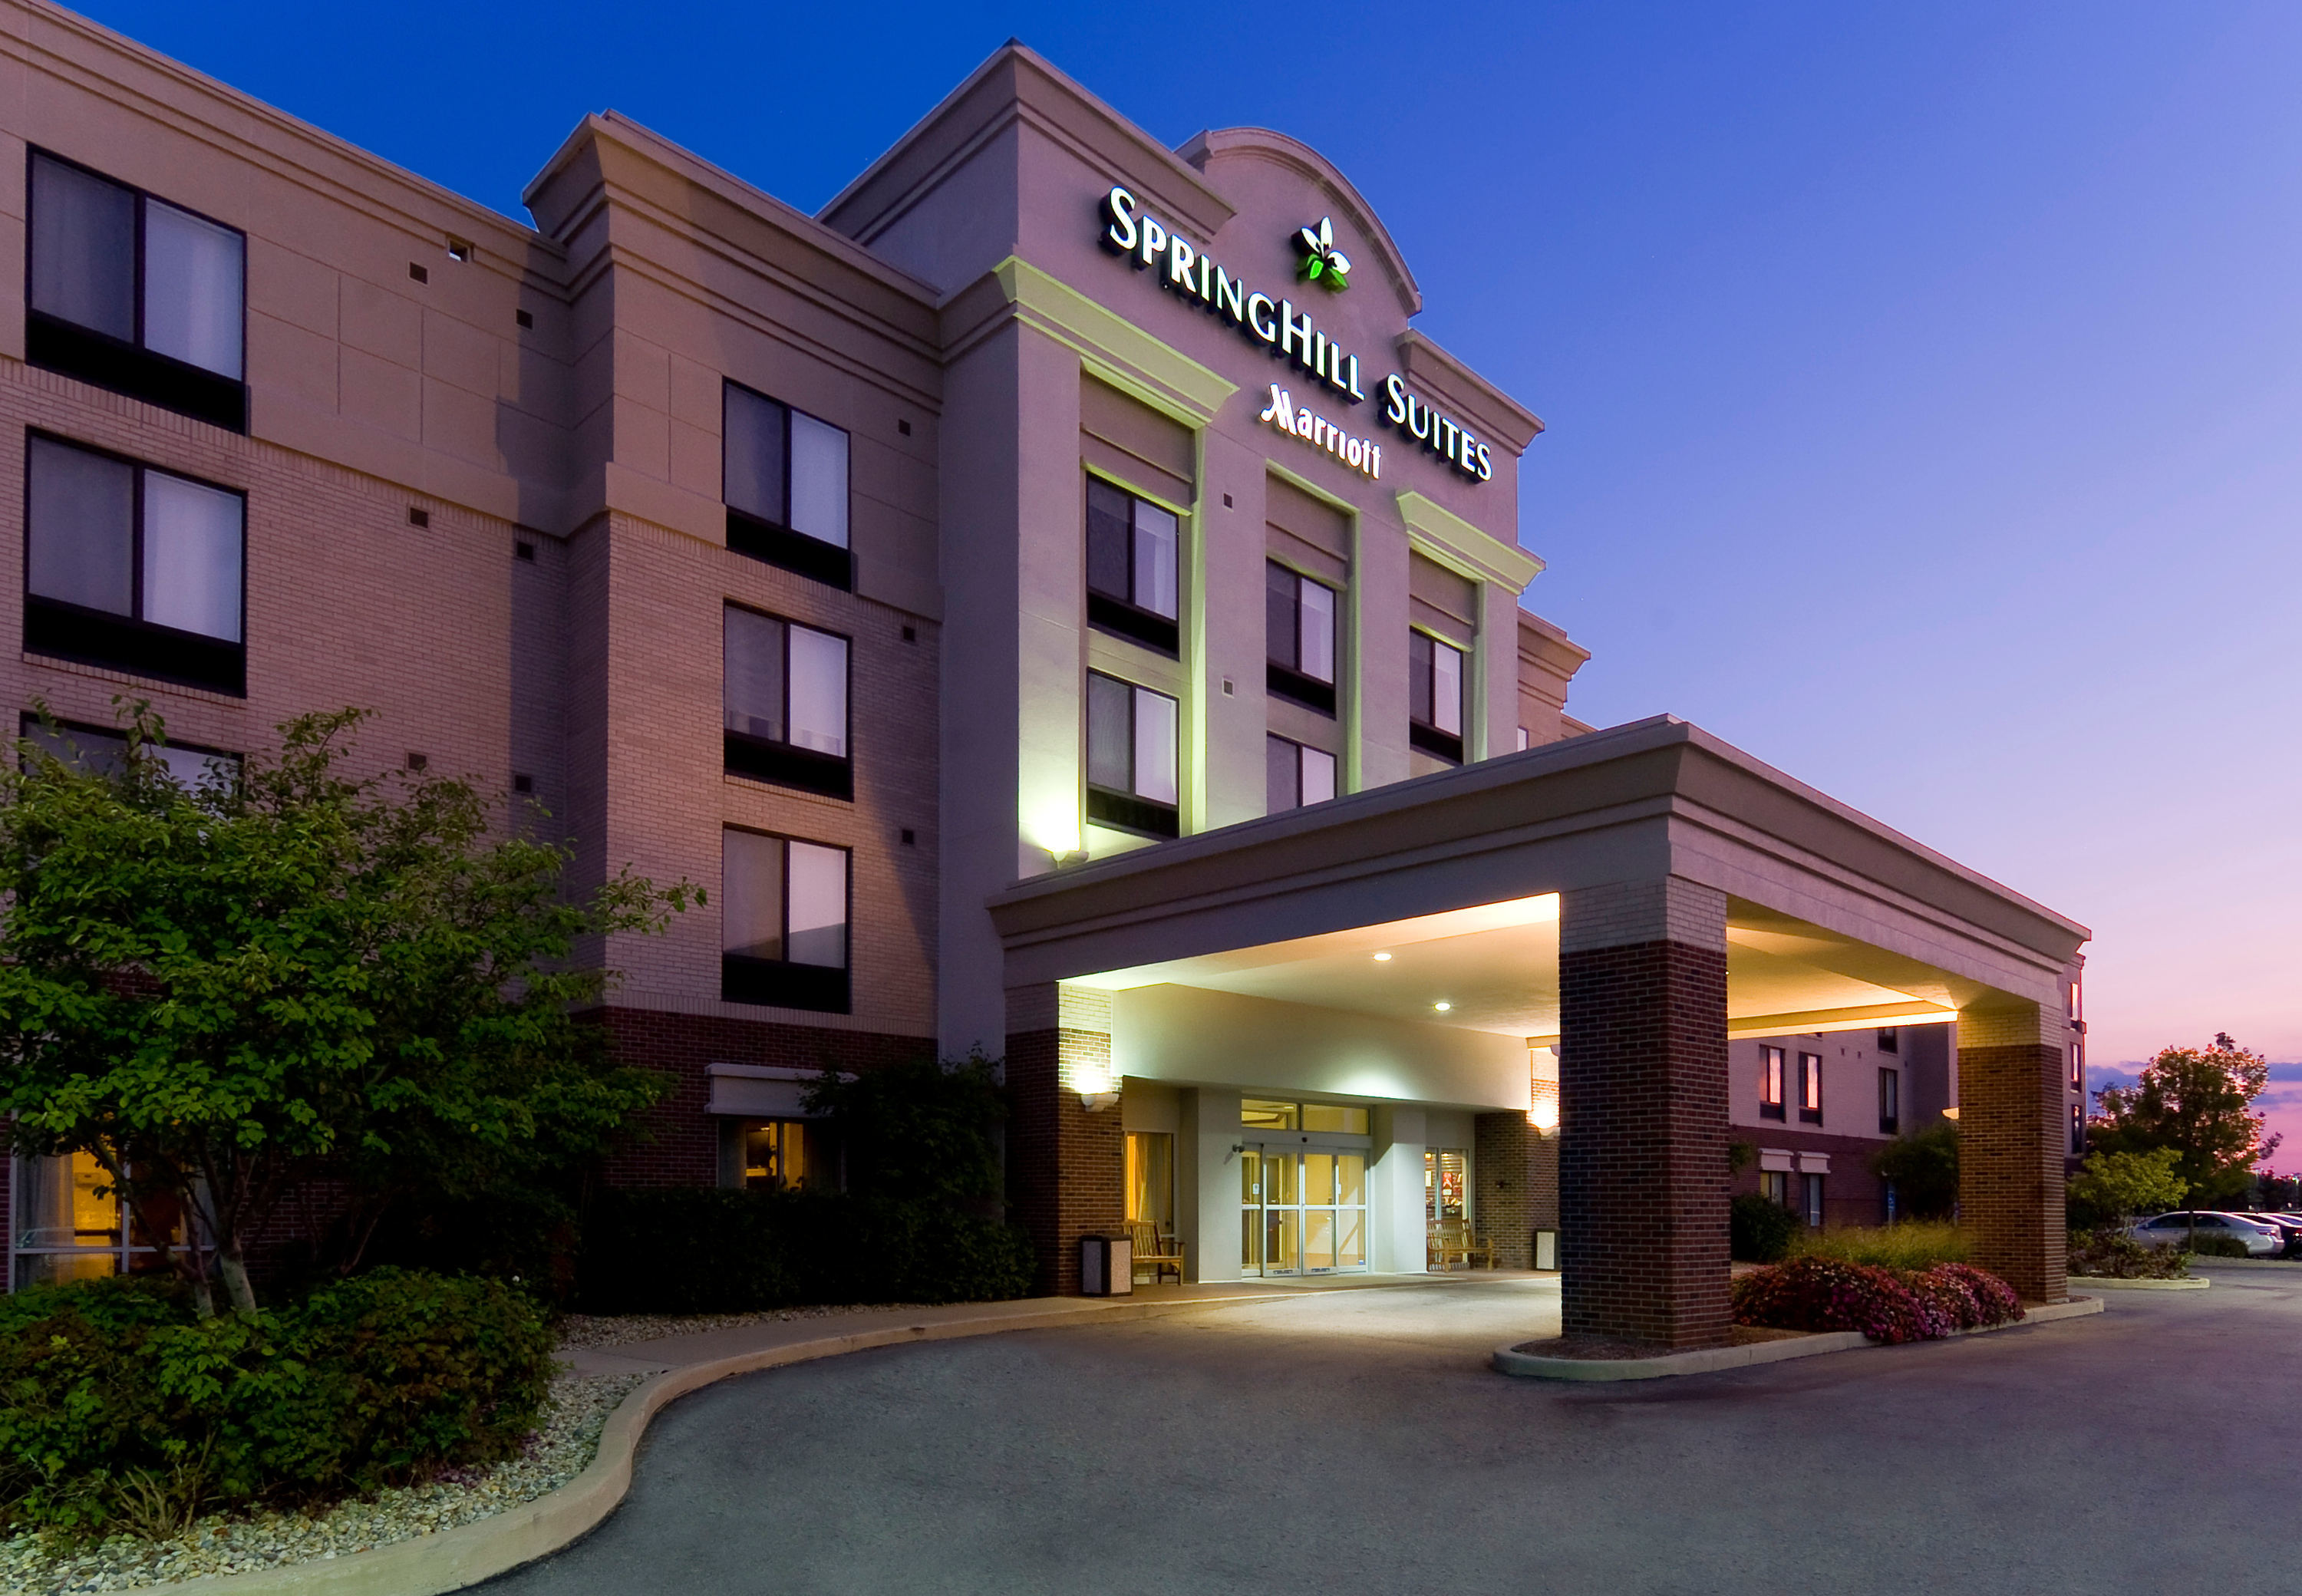 Photo of SpringHill Suites Indianapolis Carmel, Carmel, IN